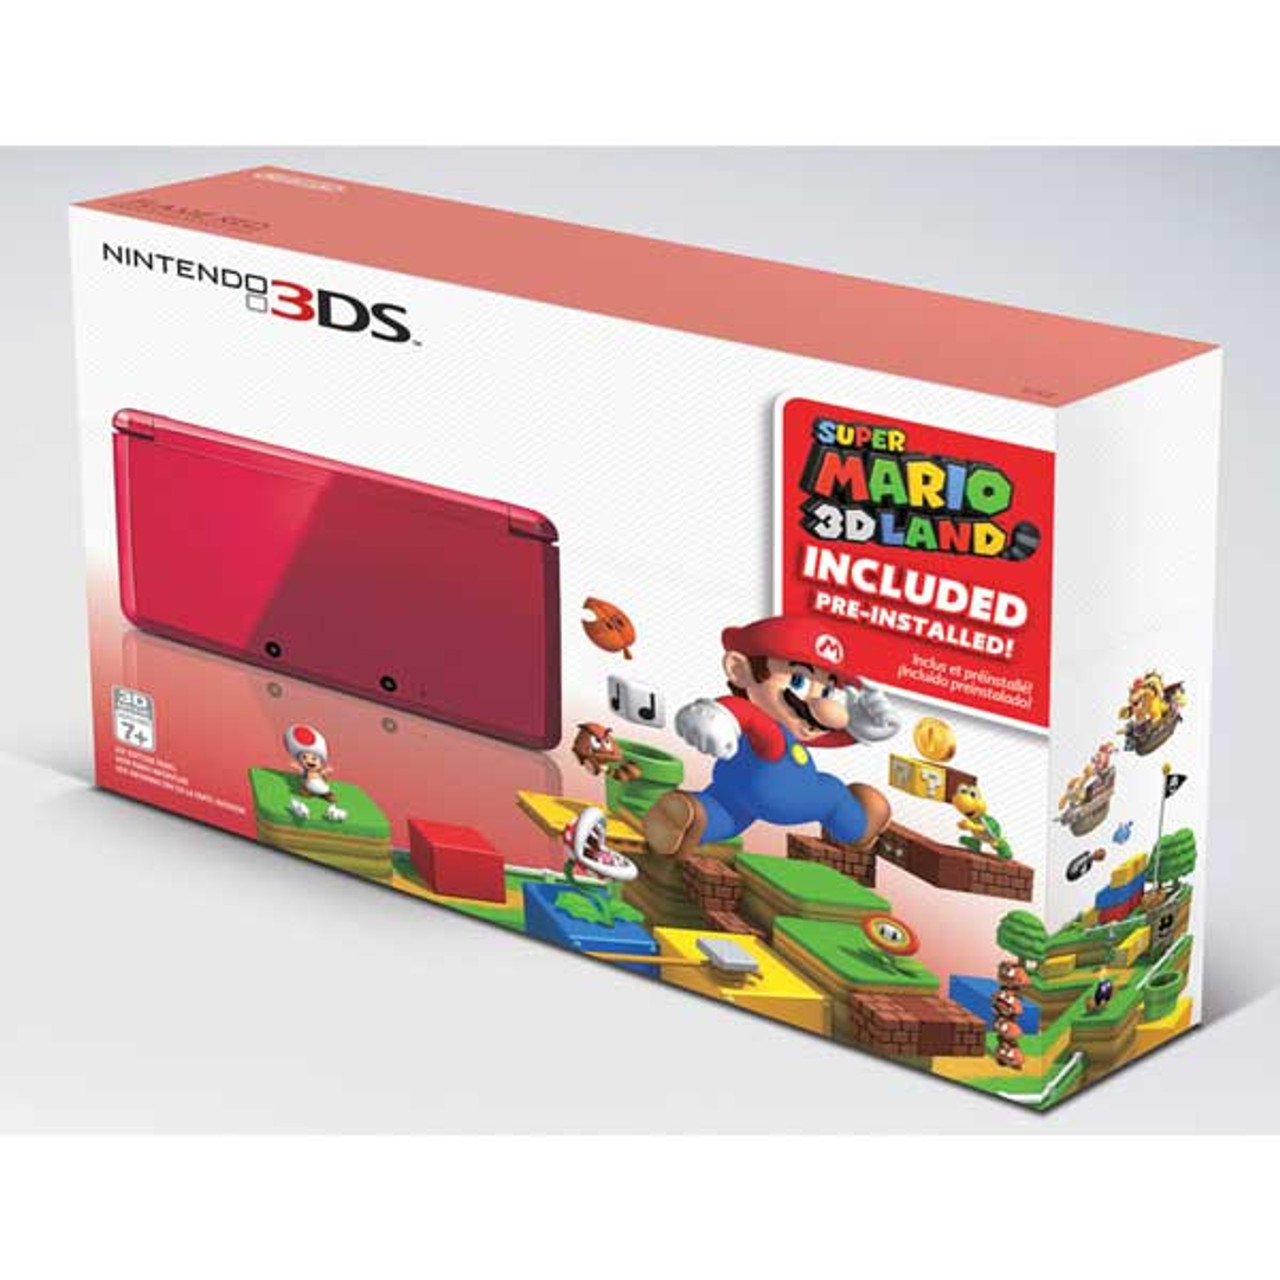 Super Mario 3d Land Nintendo 3ds Flame Red W Charger In Box For Sale Dkoldies 6265